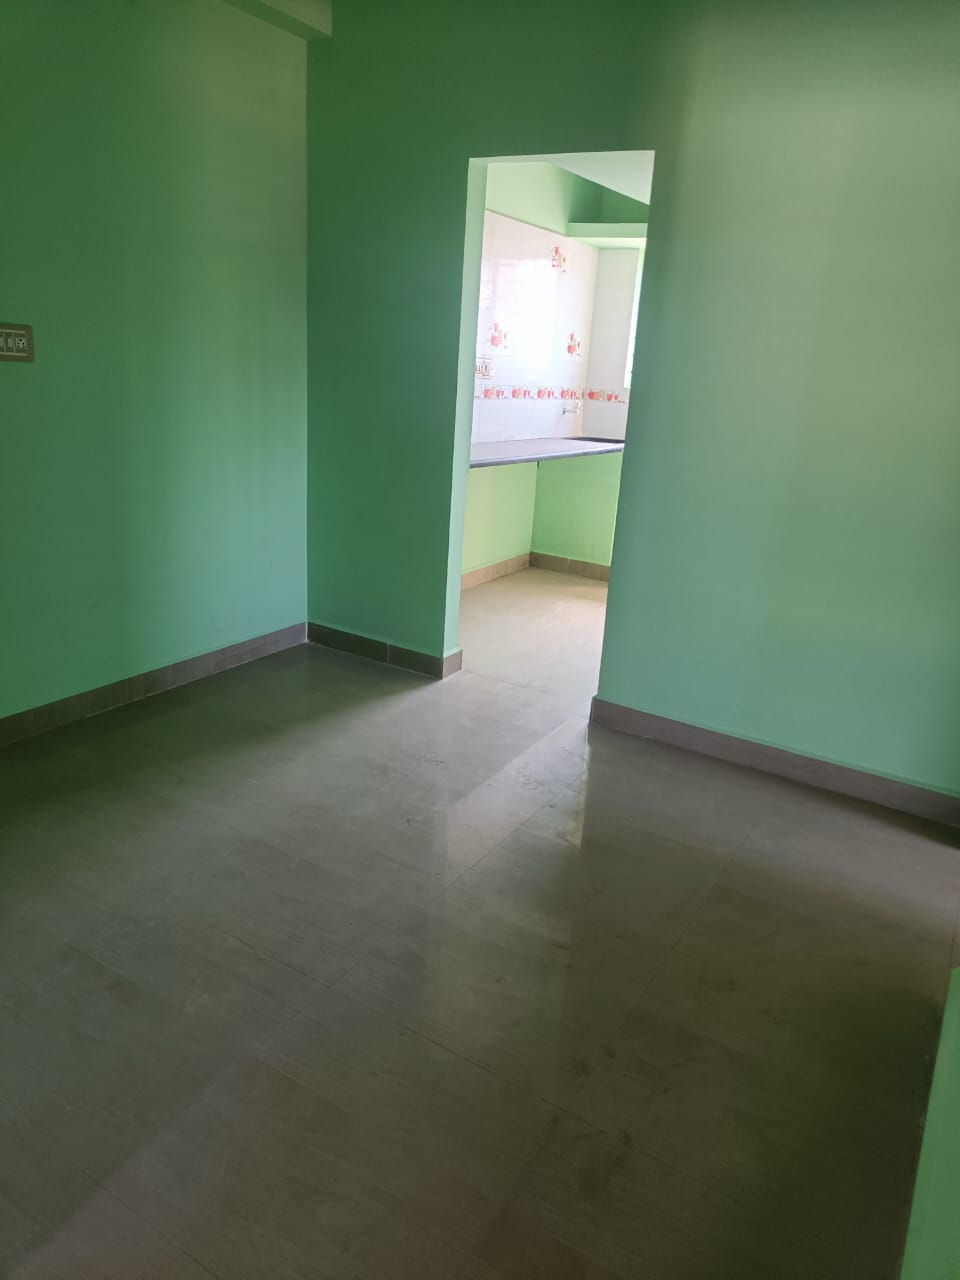 1 BHK Independent House for Lease Only at JAML2 - 4503 in HBR Layout